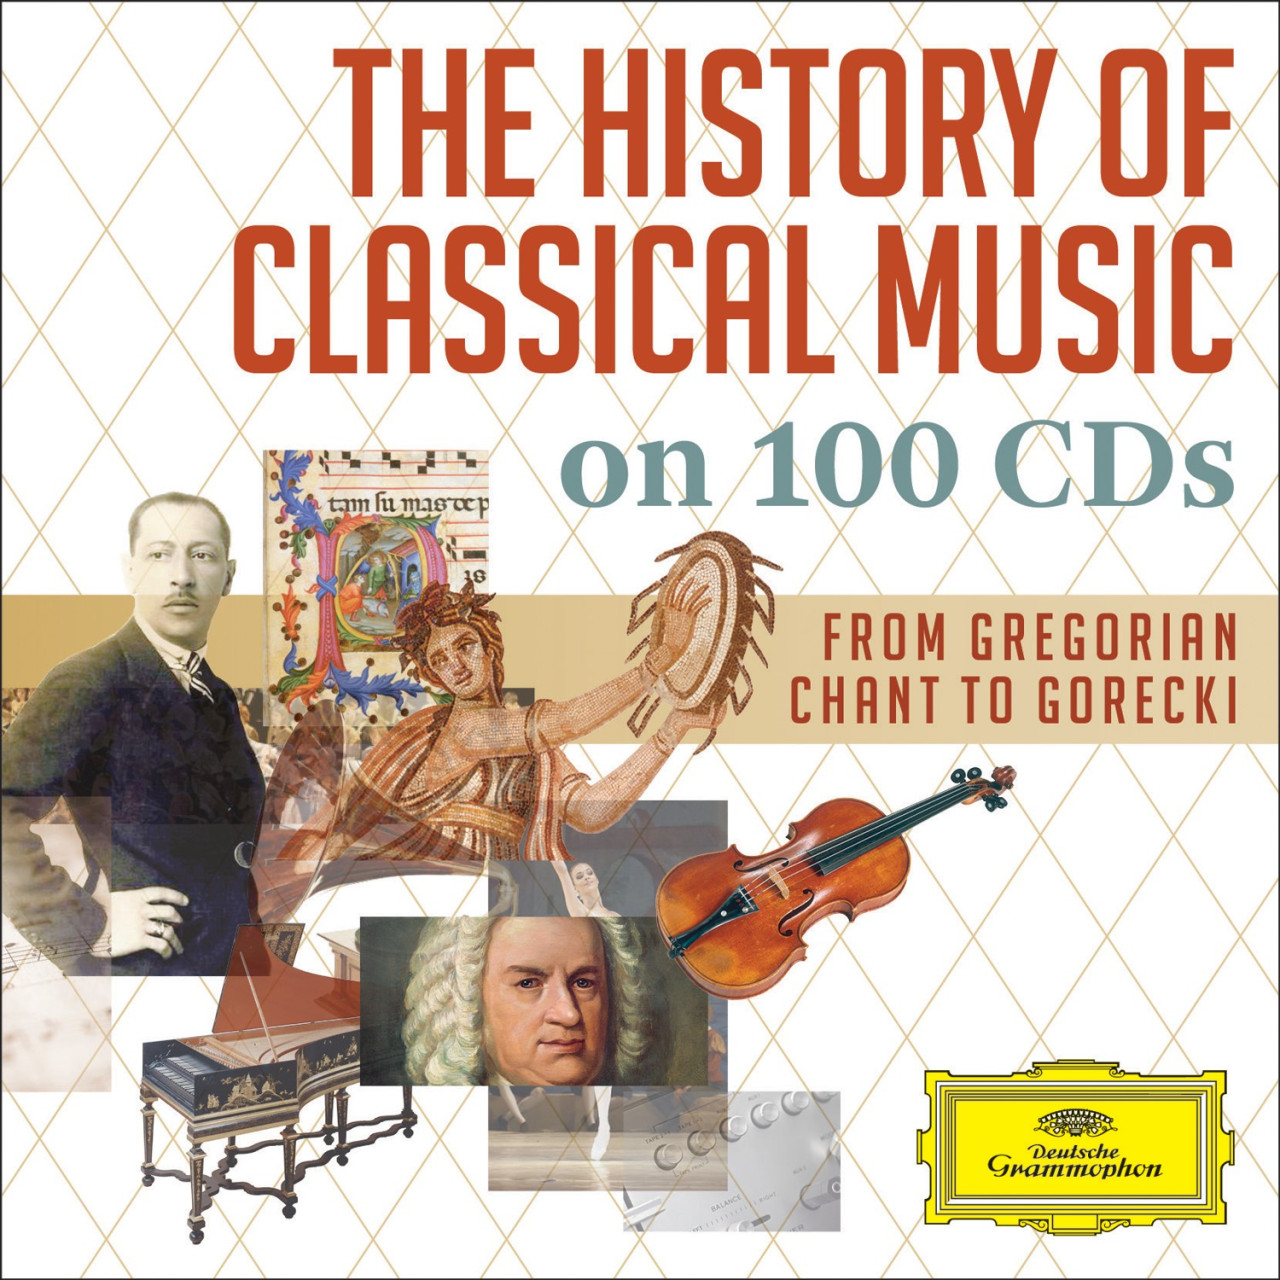 THE HISTORY OF CLASSICAL MUSIC ON 100 CDs | Deutsche Grammophon